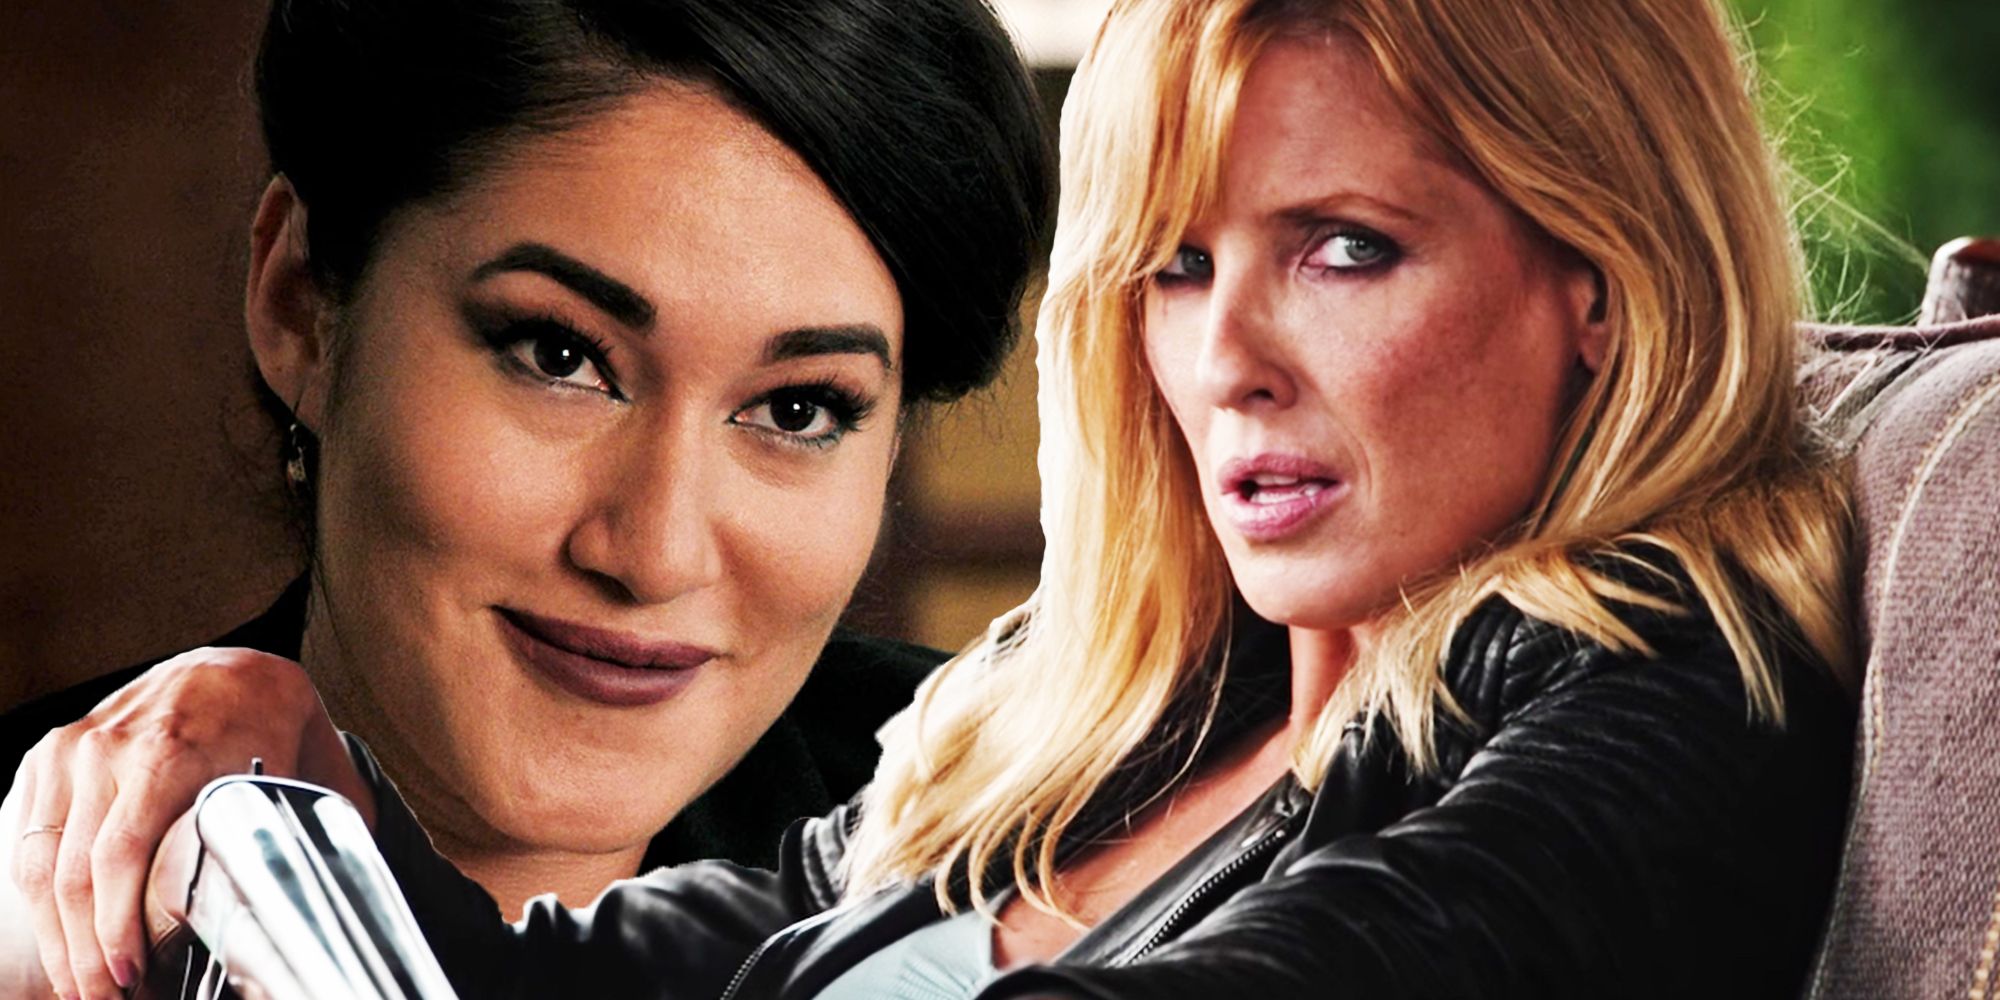 Yellowstone Season 5's Best Story Is Angela Blue Thunder & Beth Teaming Up